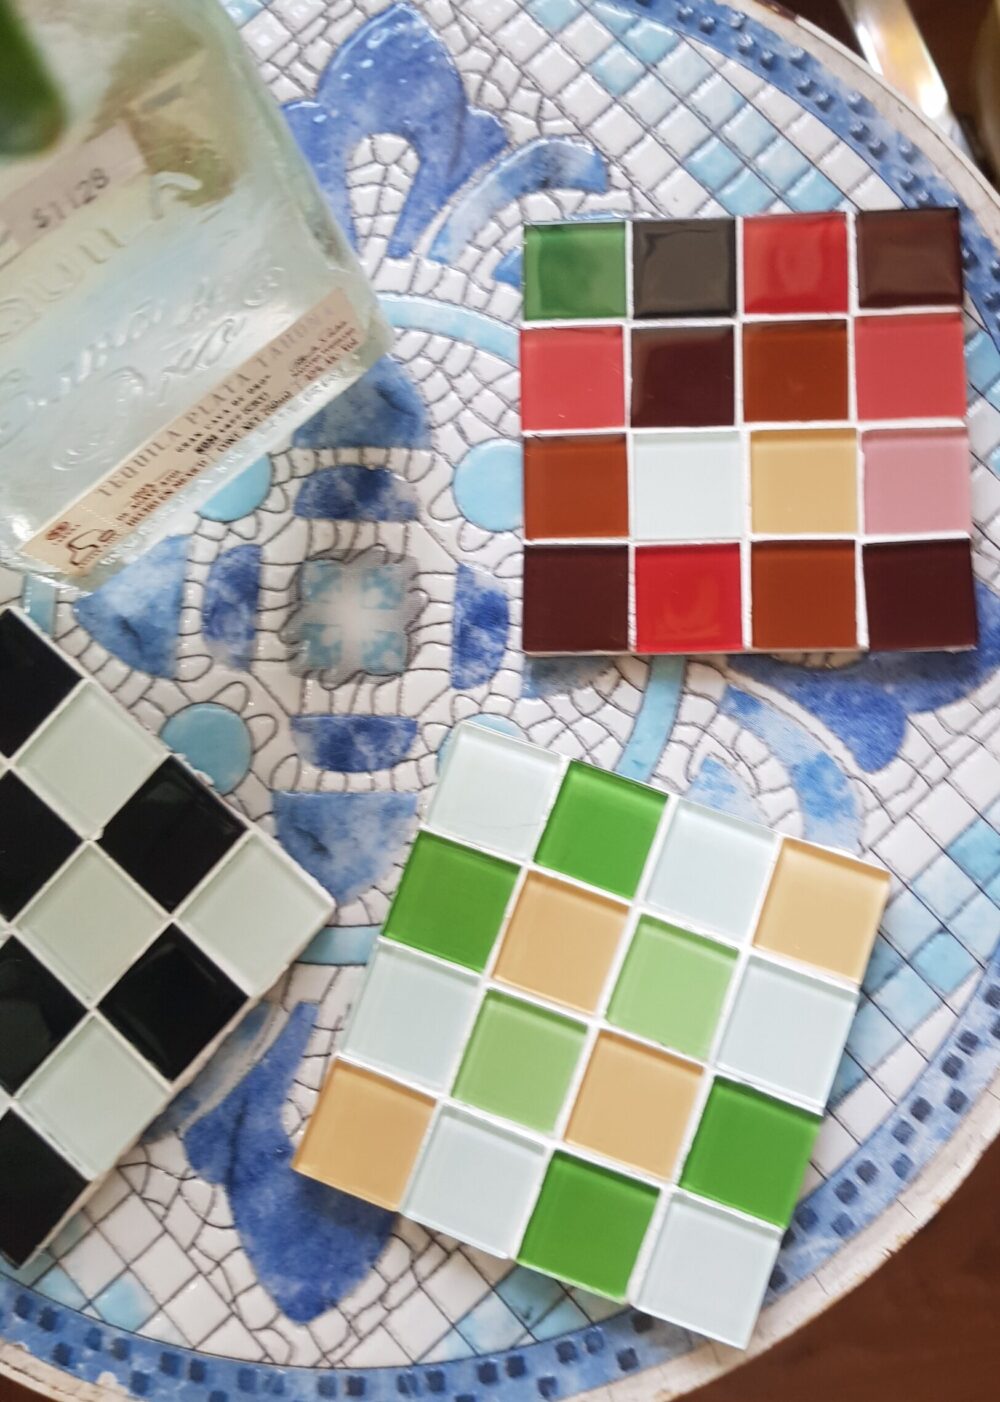 Super Easy DIY Gifts For Her ANYONE Can Make: diy glass tile coasters